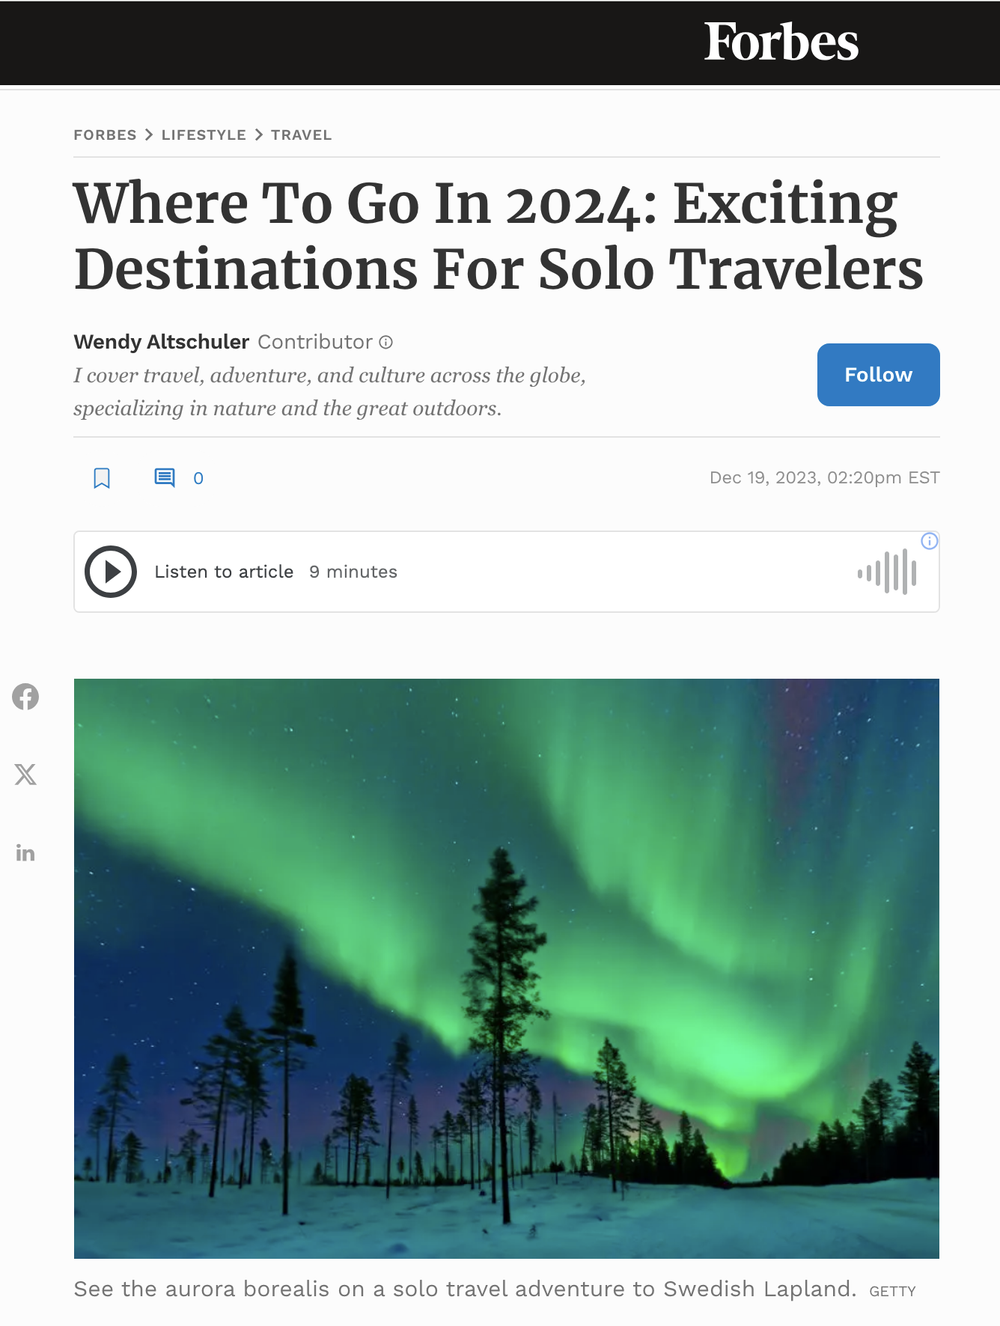 Where To Go In 2024: Exciting Destinations For Solo Travelers